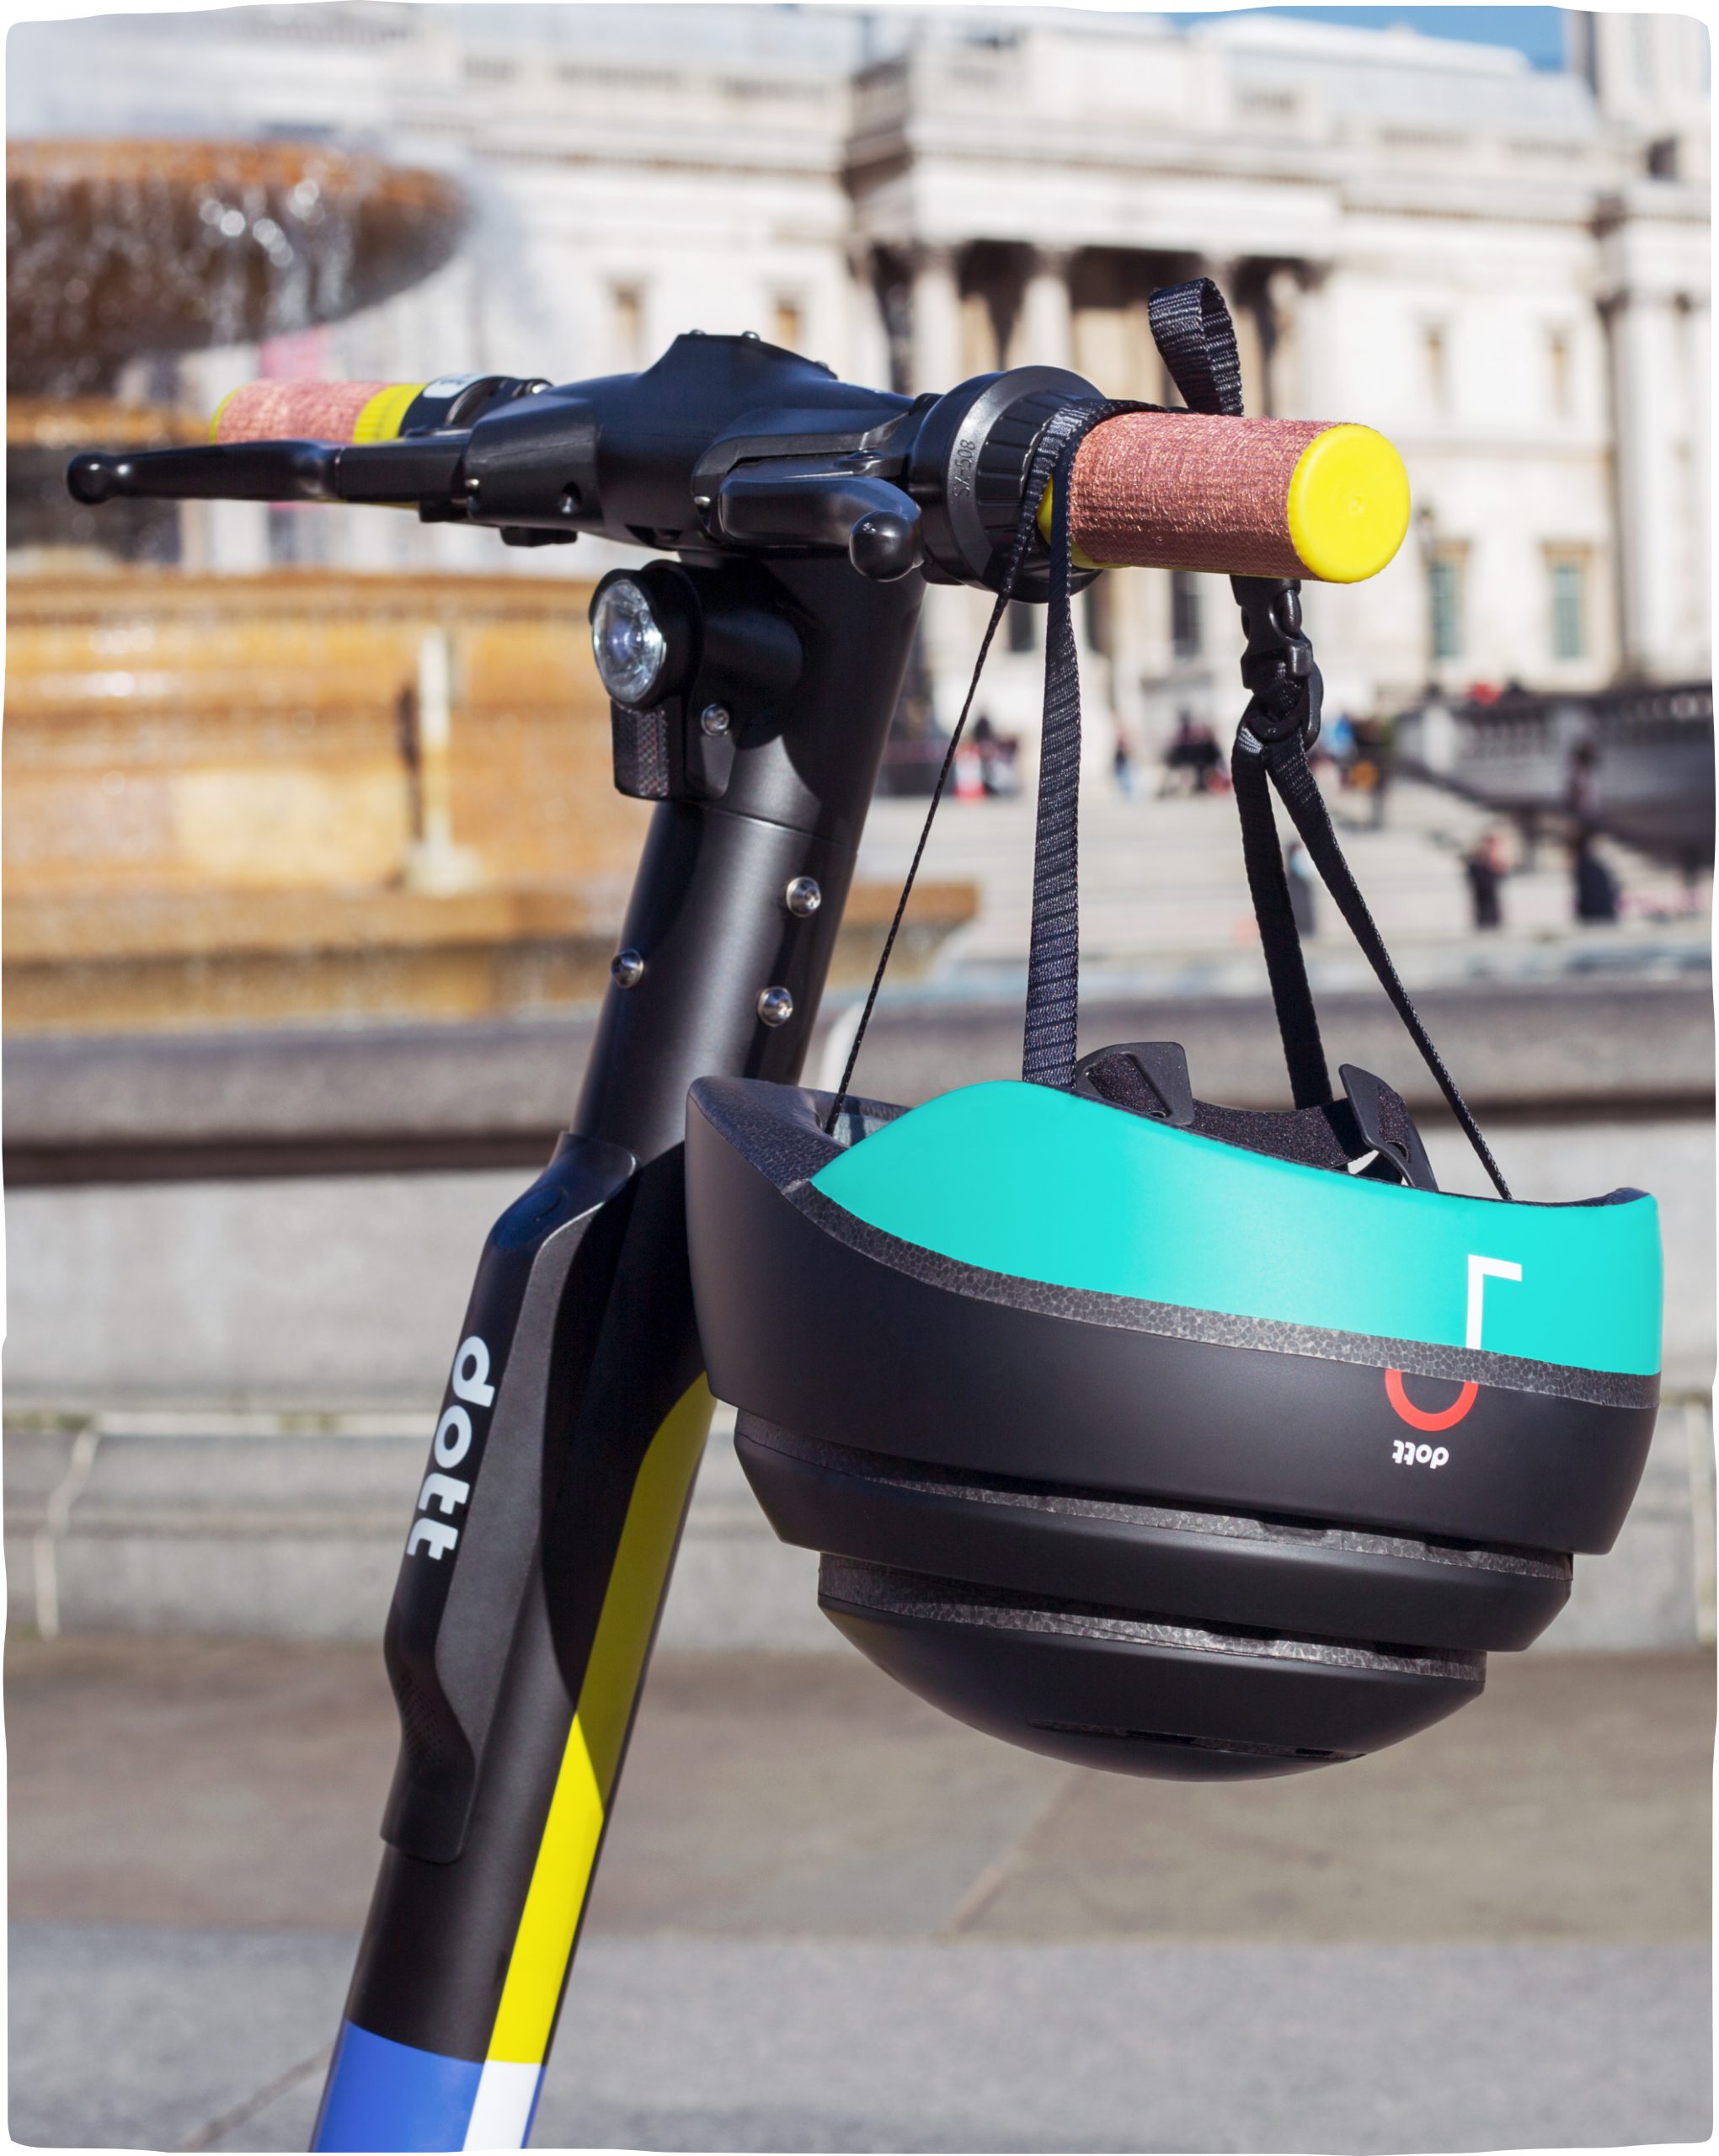 An image of a parked Dott scooter with only the handlebars in the frame. A Dott-branded helmet hangs from the handlebars.